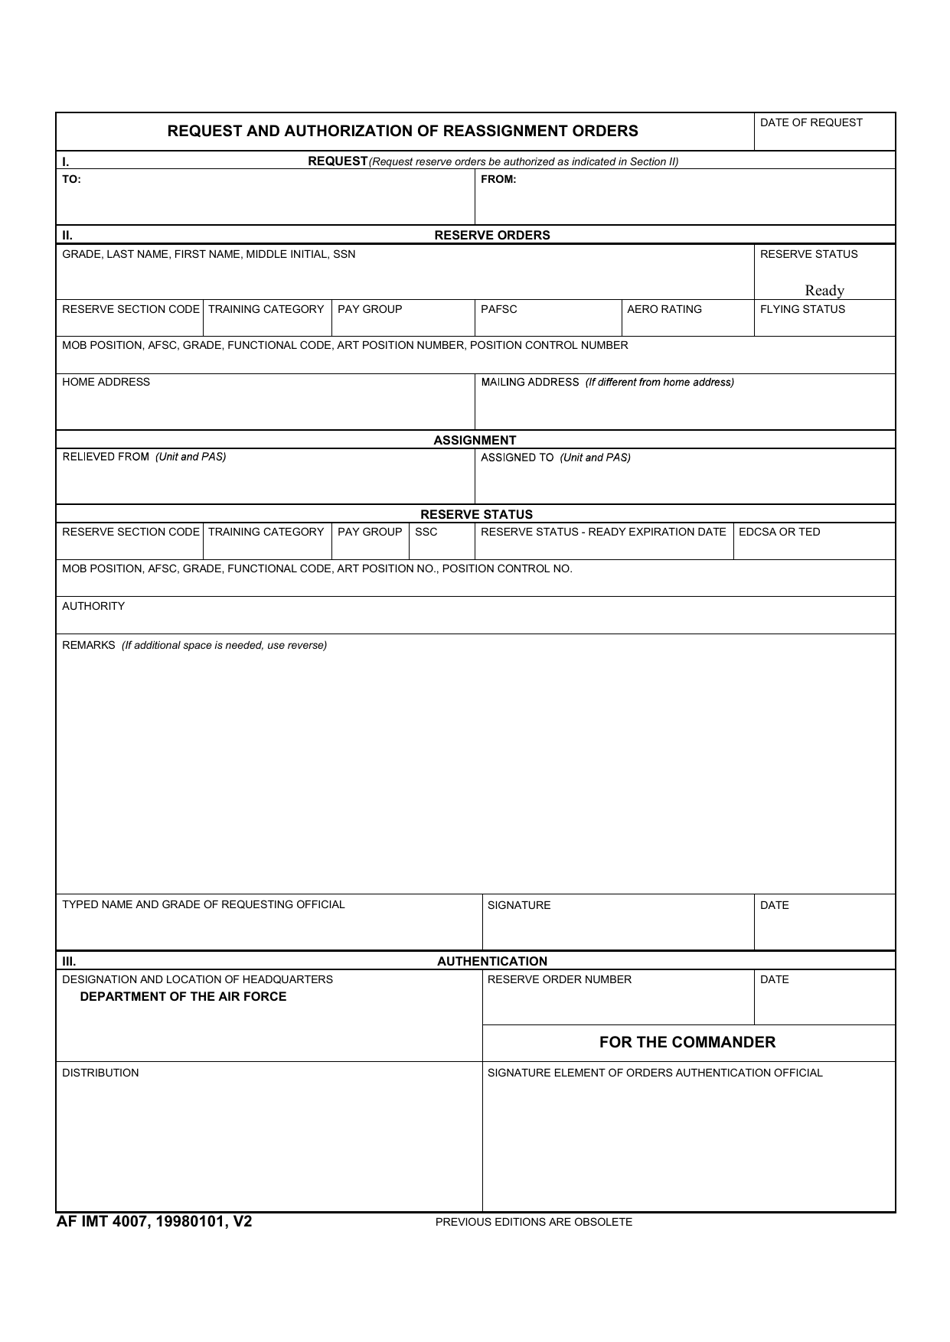 AF IMT Form 4007 Request and Authorization of Reassignment Orders, Page 1